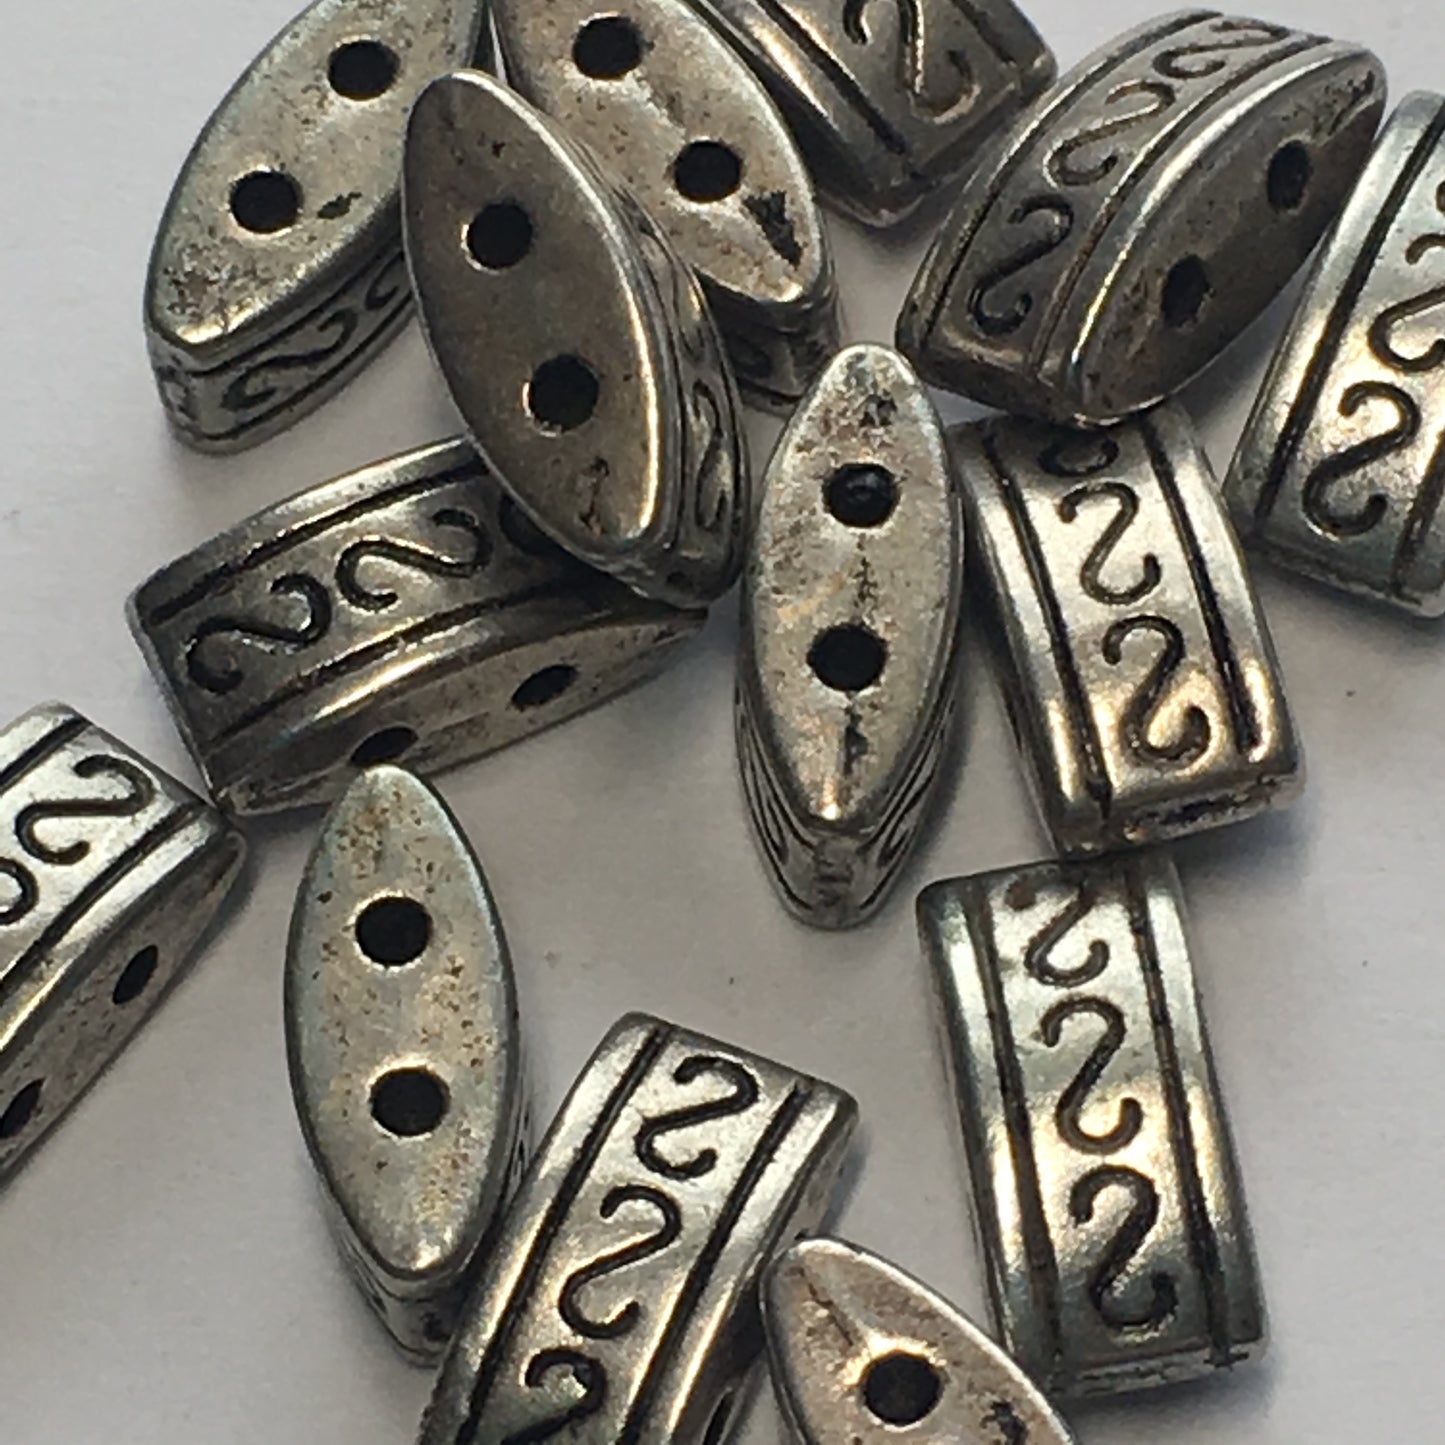 Antique Silver Two-Strand Spacer Bar Beads, 10 x 5 mm - 14 Beads/Bars